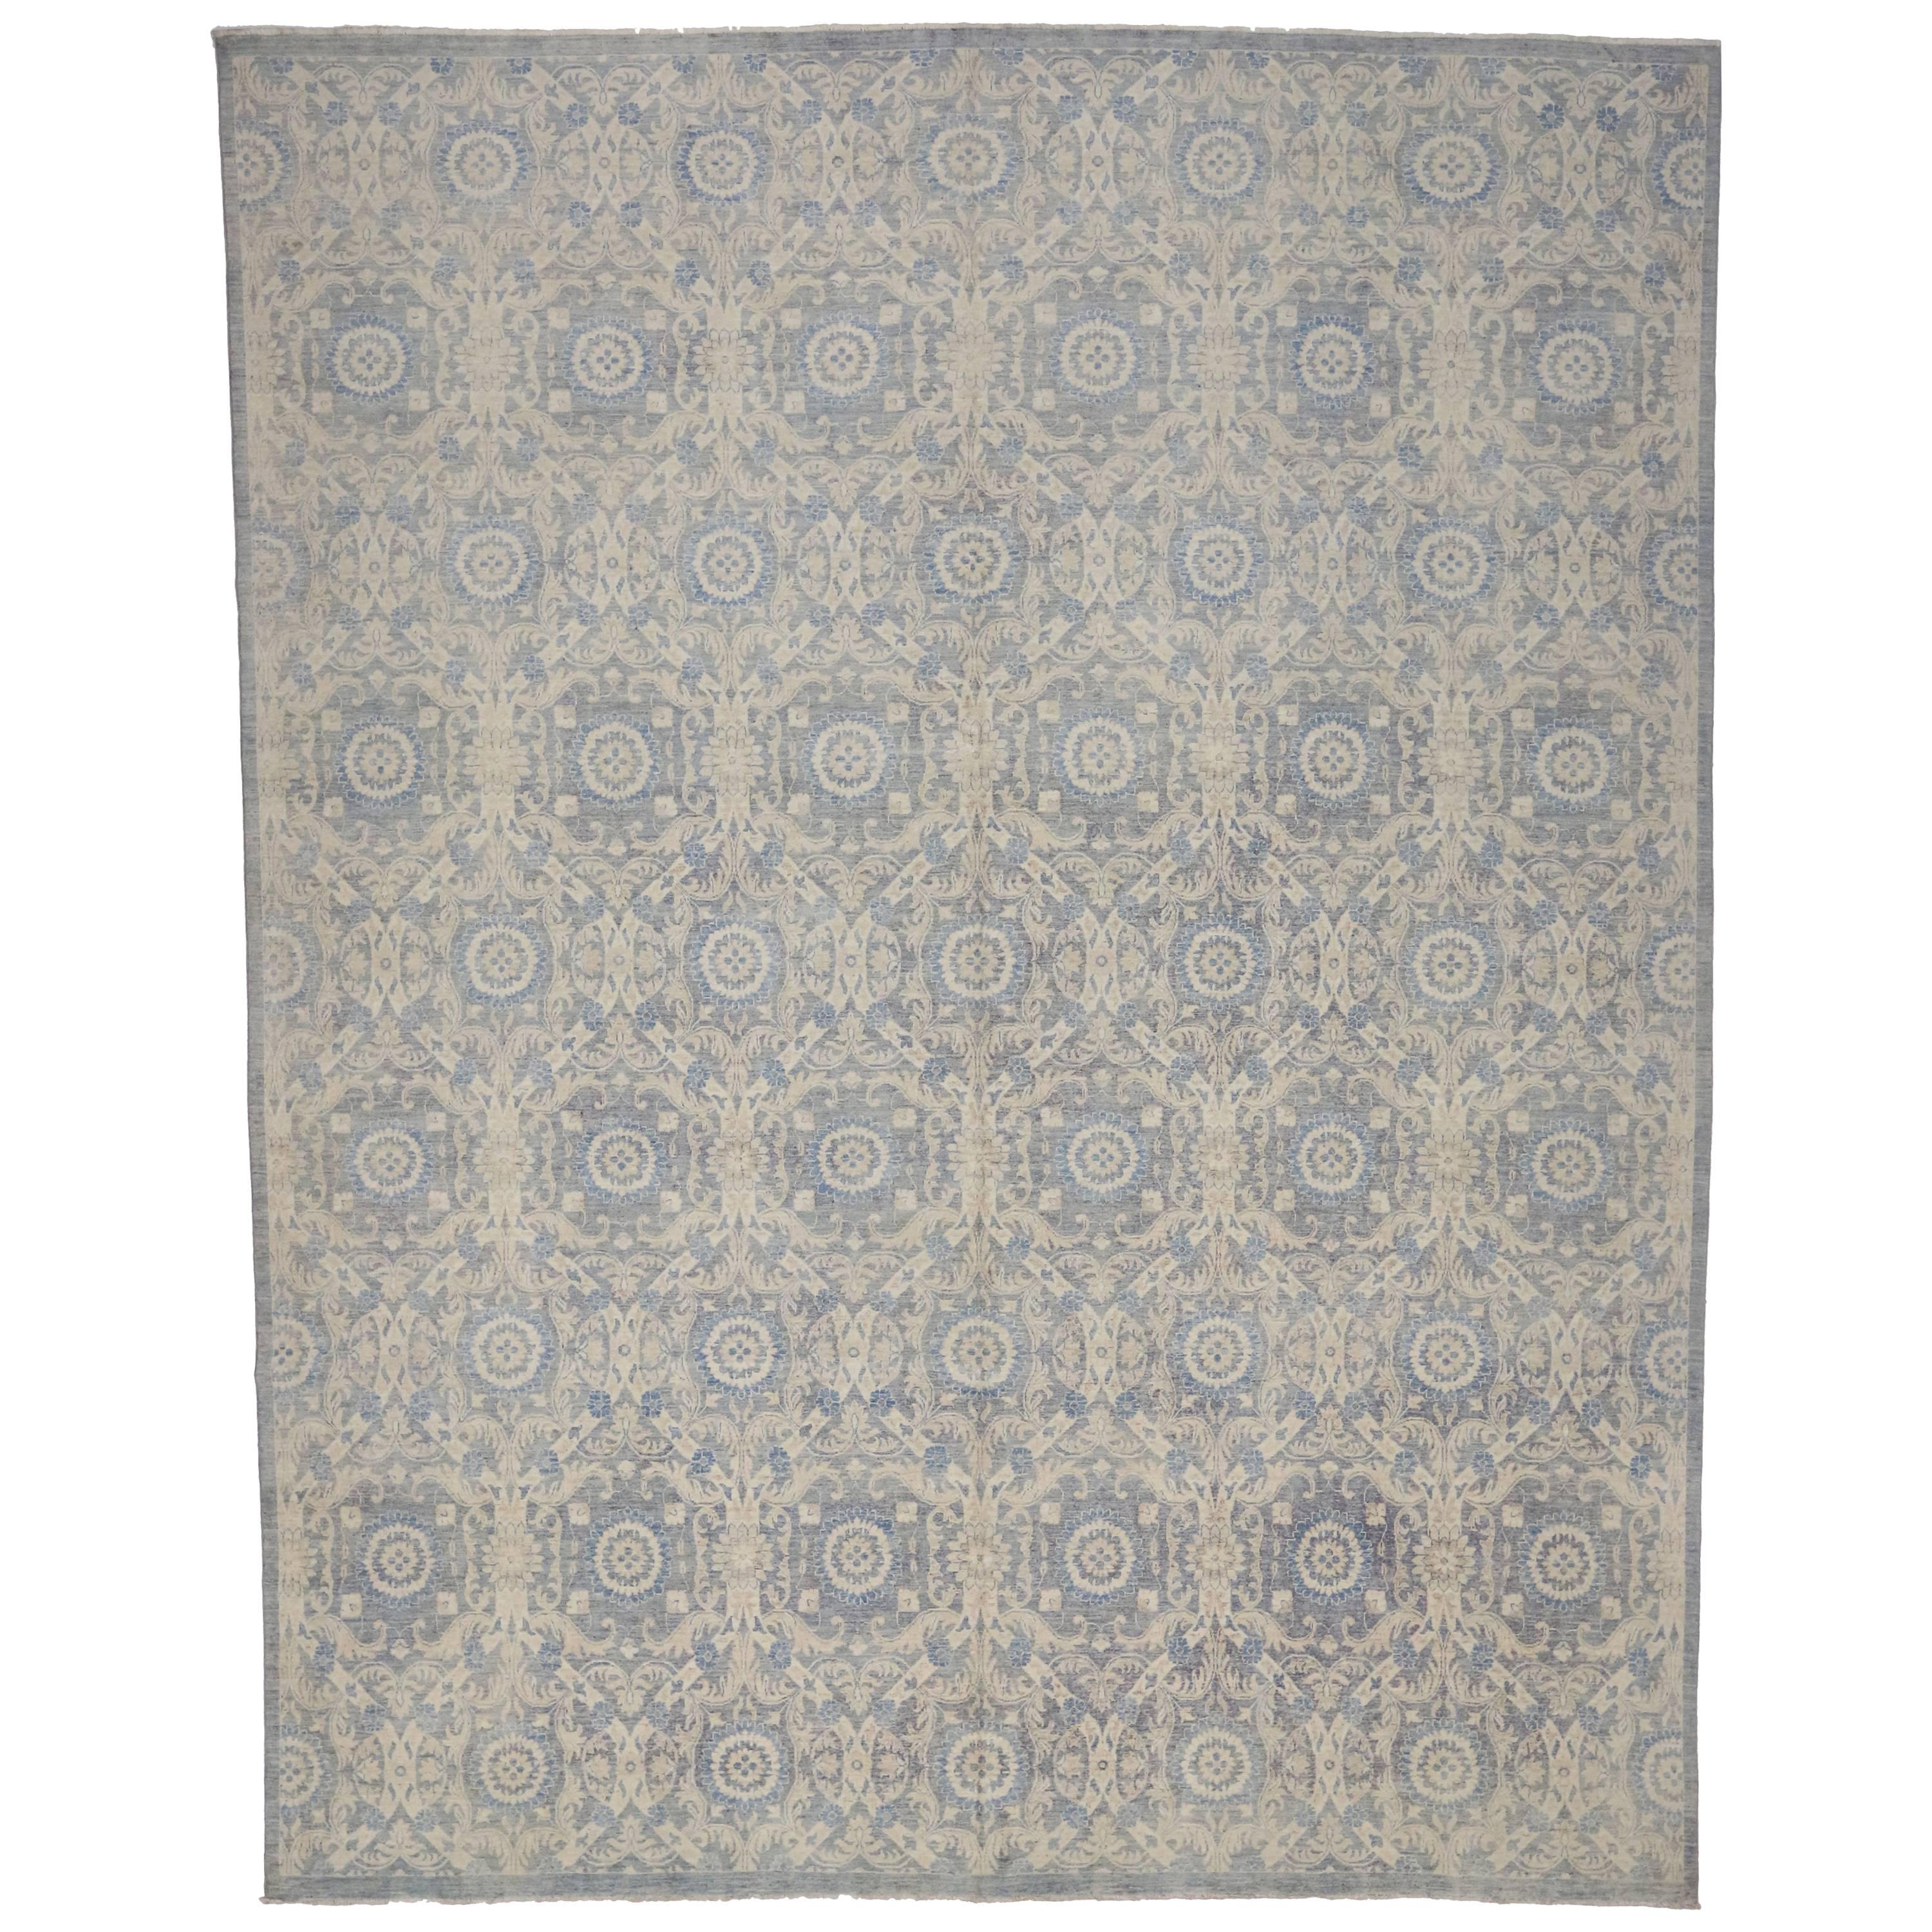 New Transitional Area Rug with Farmhouse Cottage Style and Orphism Ogee Pattern